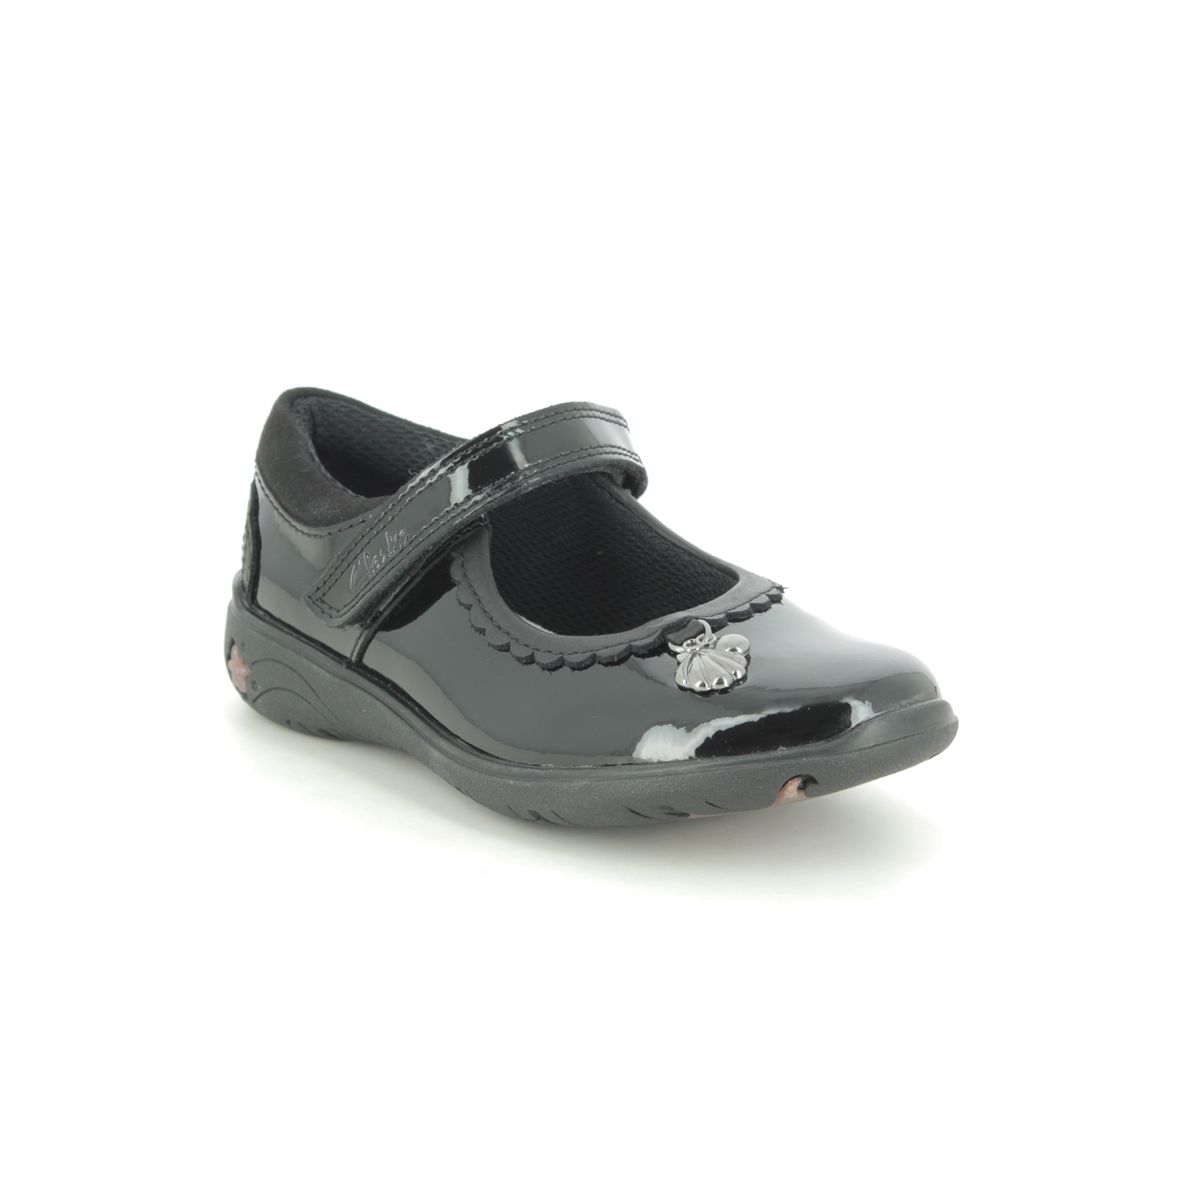 Clarks Sea Shimmer T Black patent Kids Girls Casual Shoes 5554-16F in a Plain Leather in Size 9